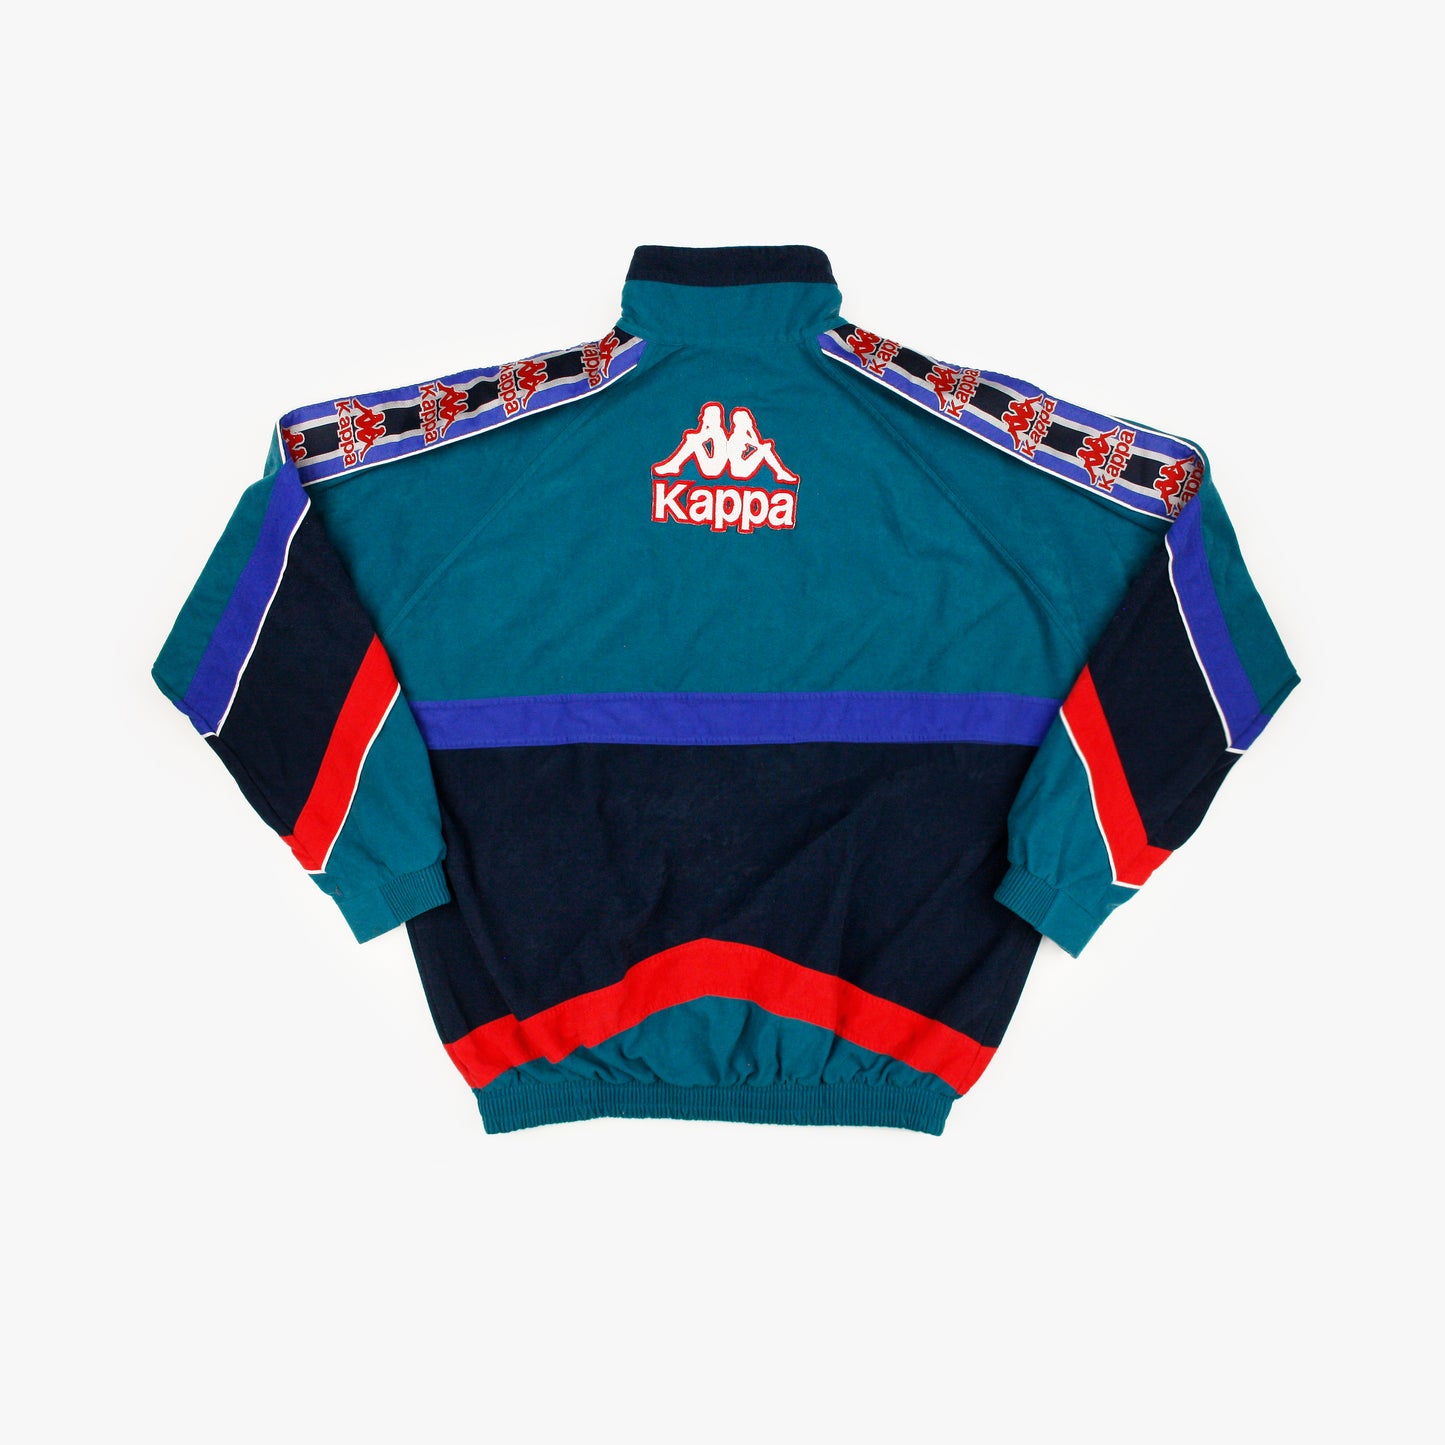 Barcelona 95/97 • Track Jacket *Player Issue* • XL